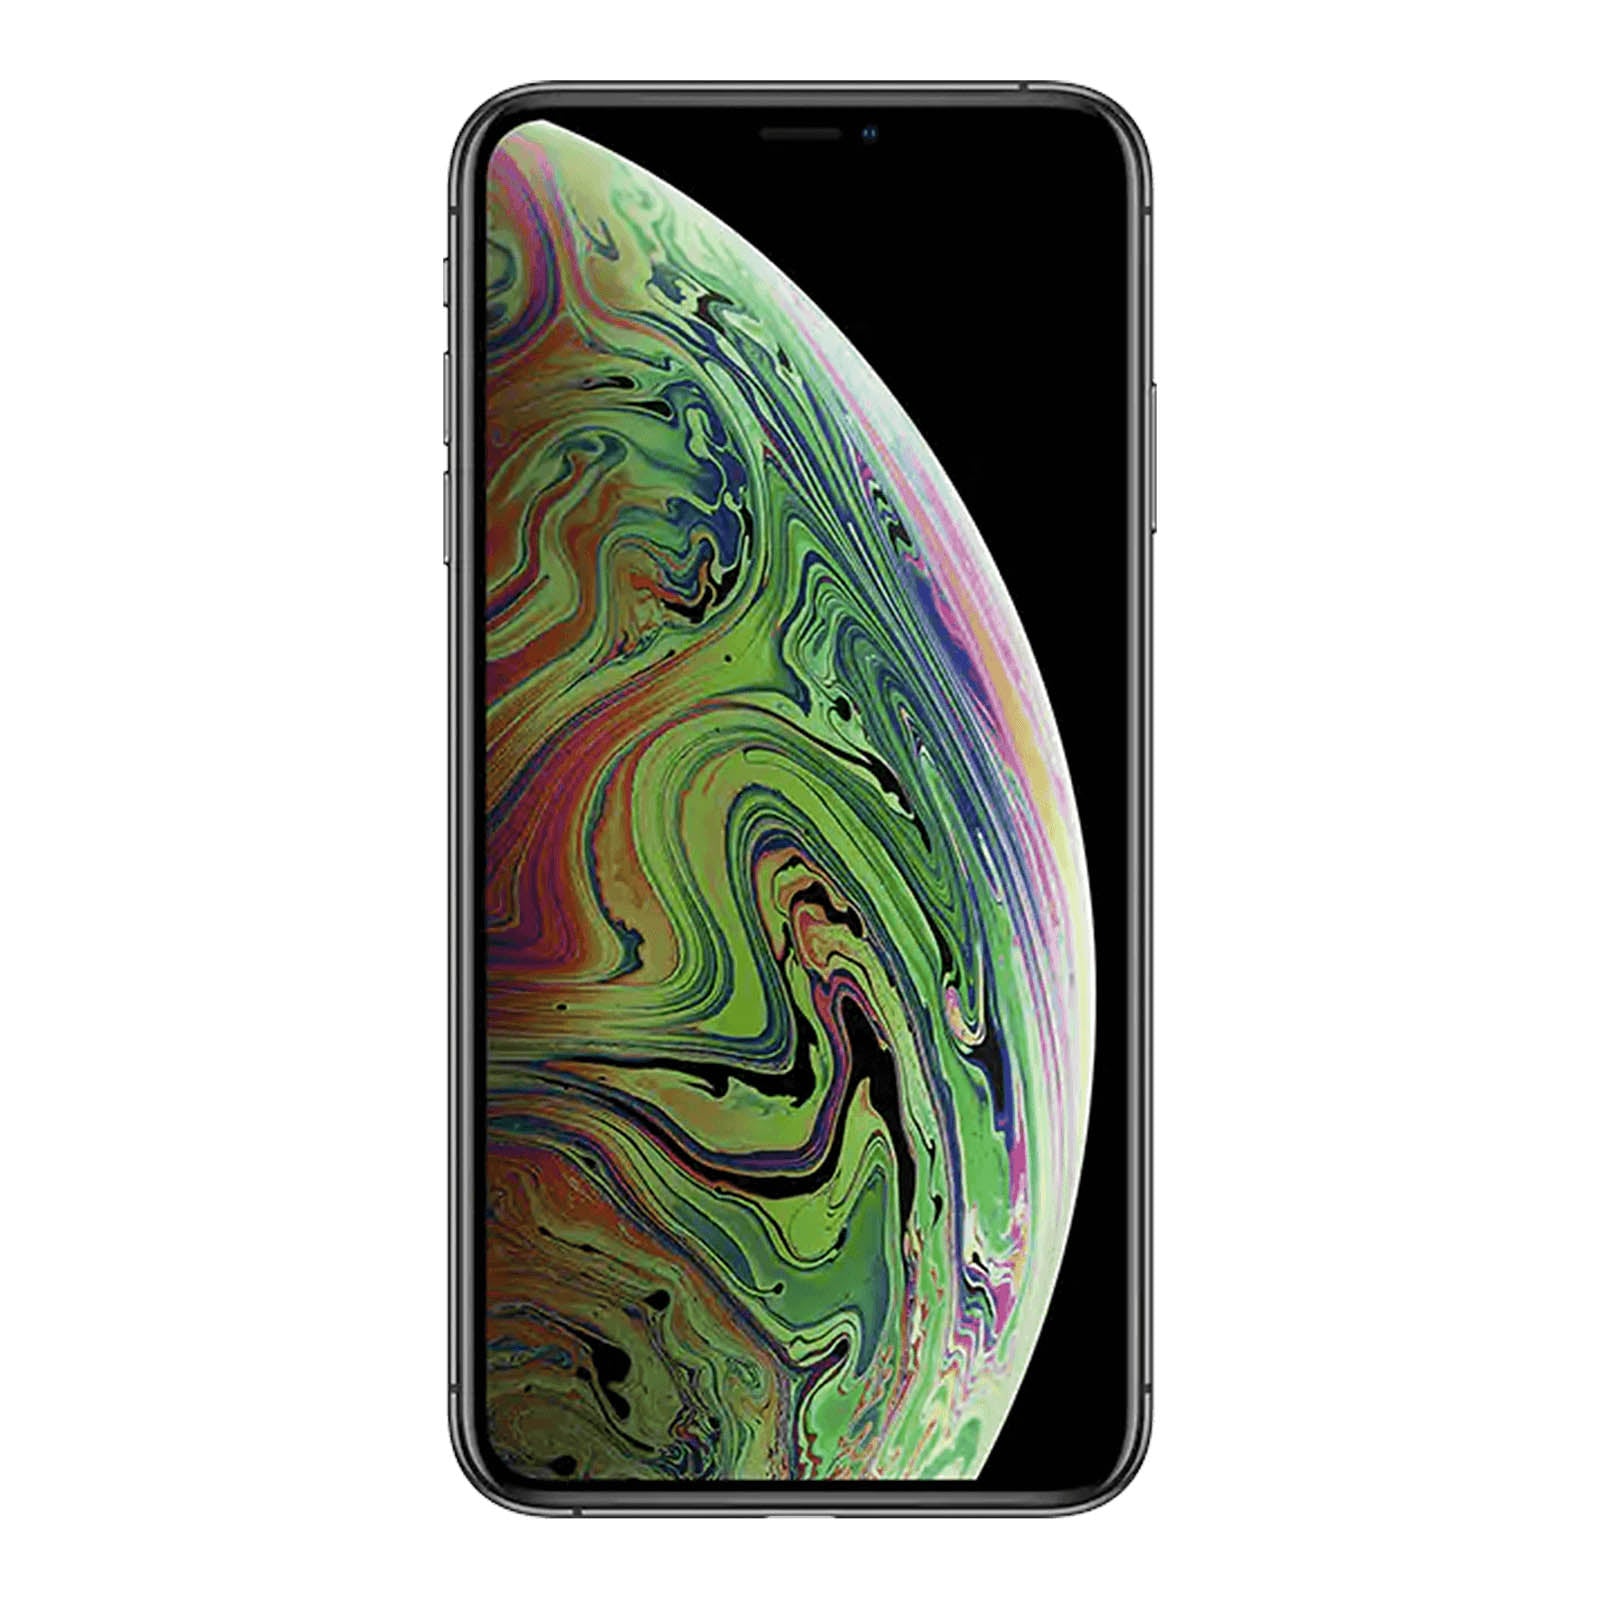 Apple iPhone XS Max 64GB Space Grey Fair - T-Mobile